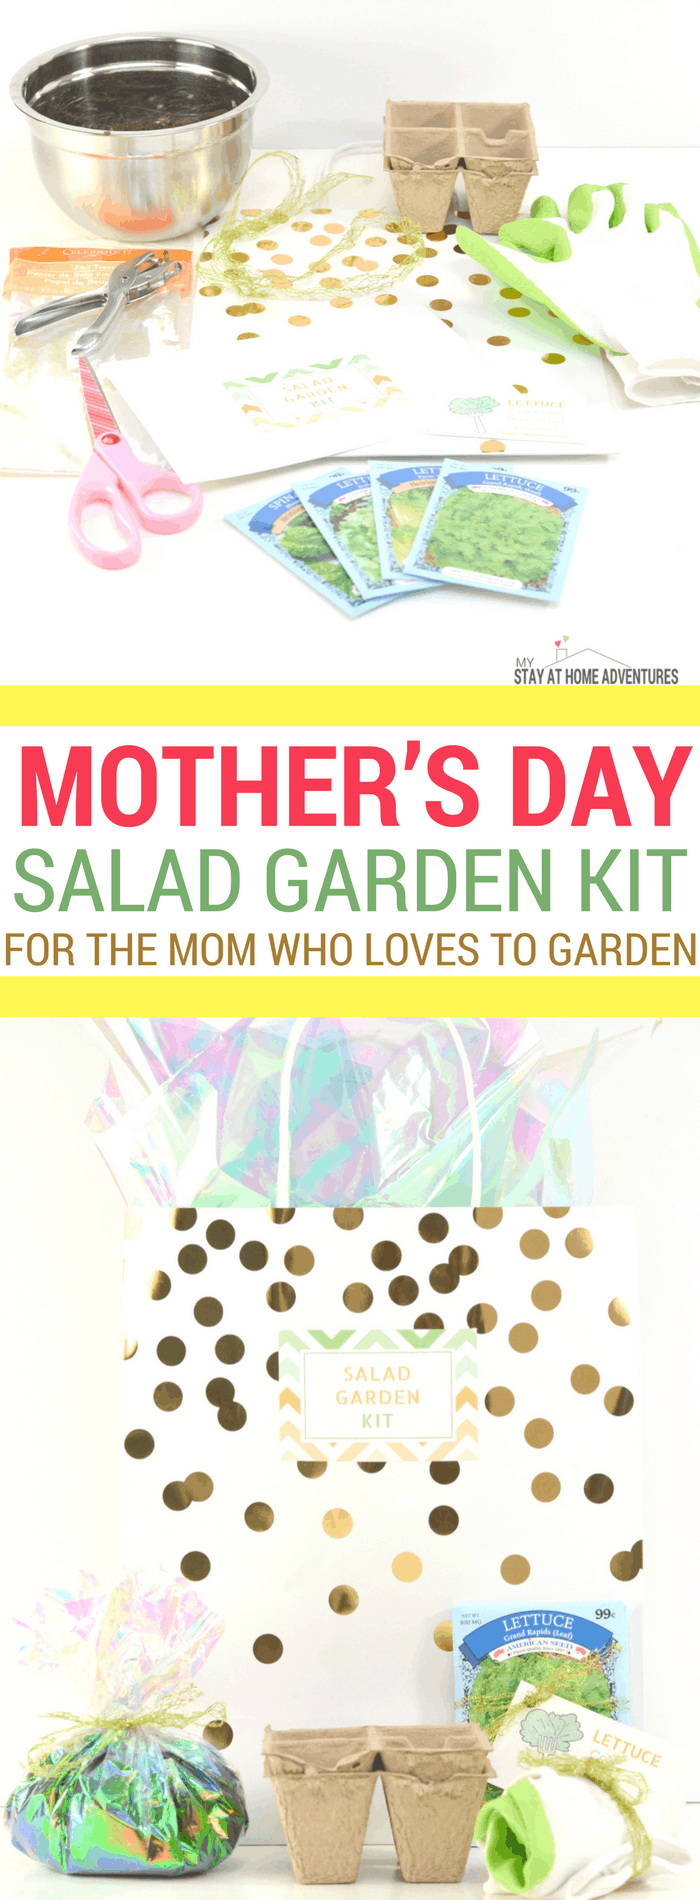 Looking for a cute and affordable Mother's Day DIY gift? Check out this super cute Mother's Day Salad Garden Kit for the mom who loves gardening and of course salad! Comes with free printable cards and all you need can be bought at your local dollar store! #Mothersday #giftideas #Garden #Seeds #DIY #gifts #Gardening #Mom